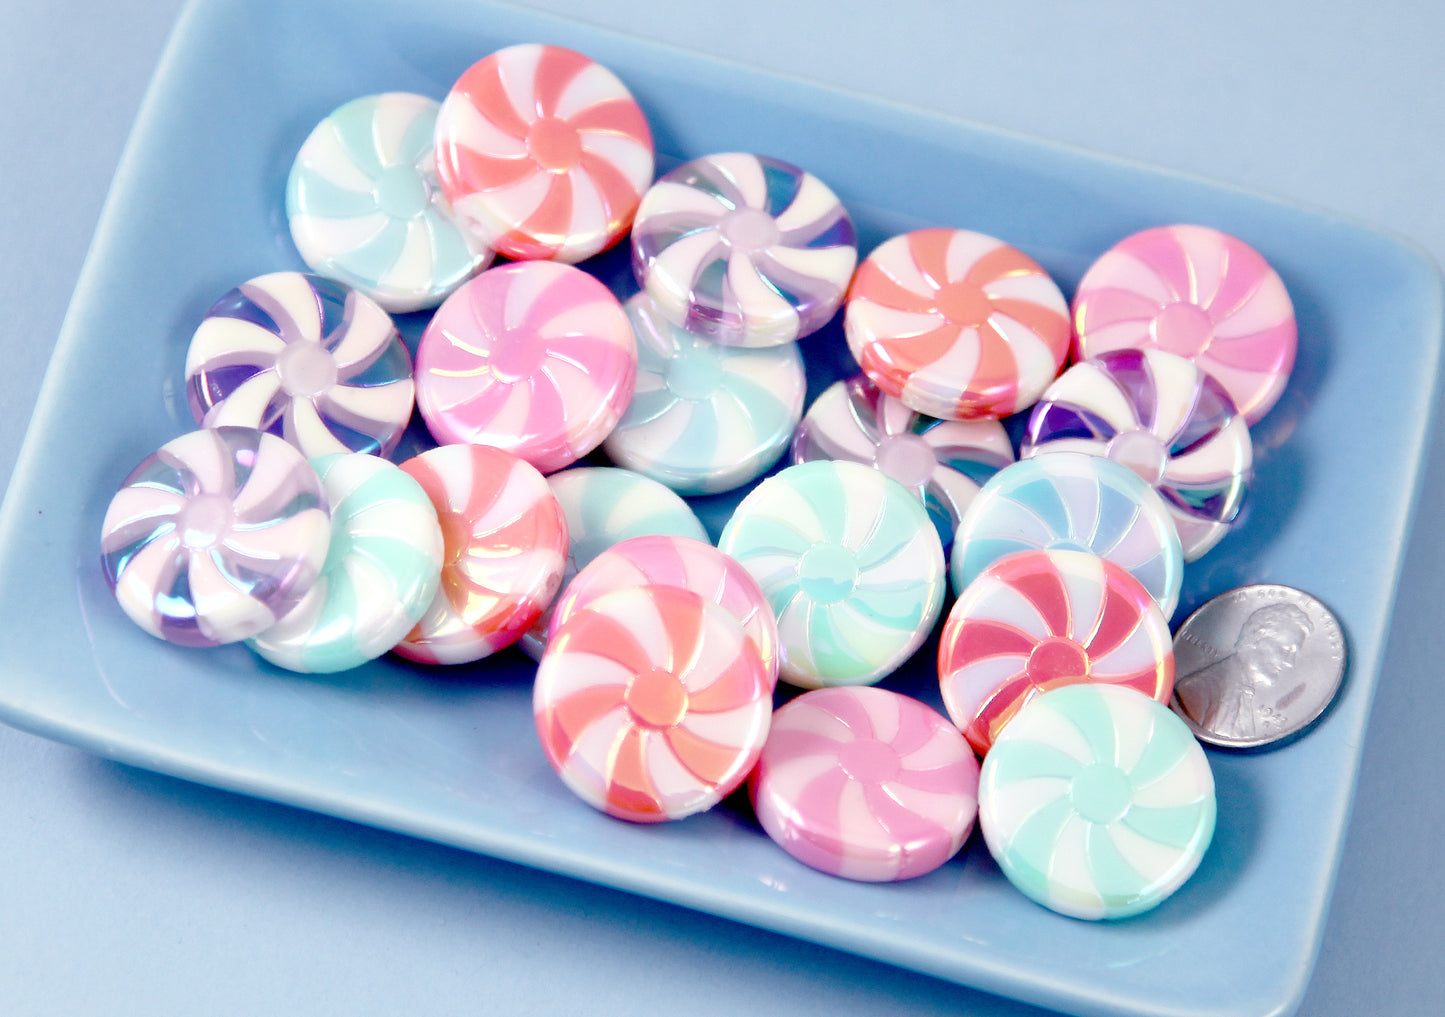 Candy Beads - 23mm Amazing AB Pastel Peppermint Swirl Beads Bright Pastel Color Candy Shape Chunky Acrylic or Resin Beads - 10 pc set